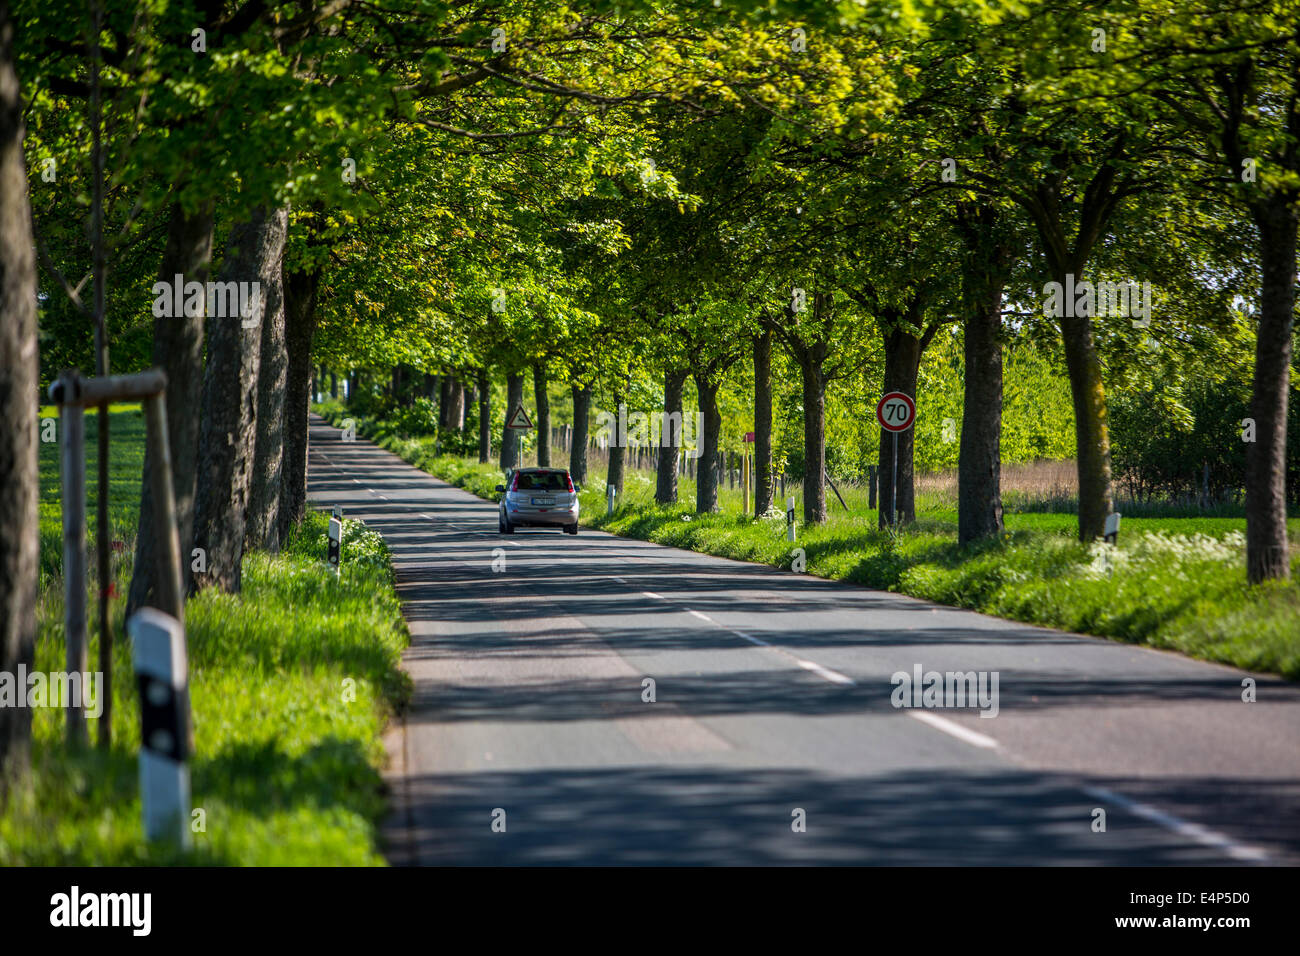 Country road, alley, avenue, trees, car, Stock Photo